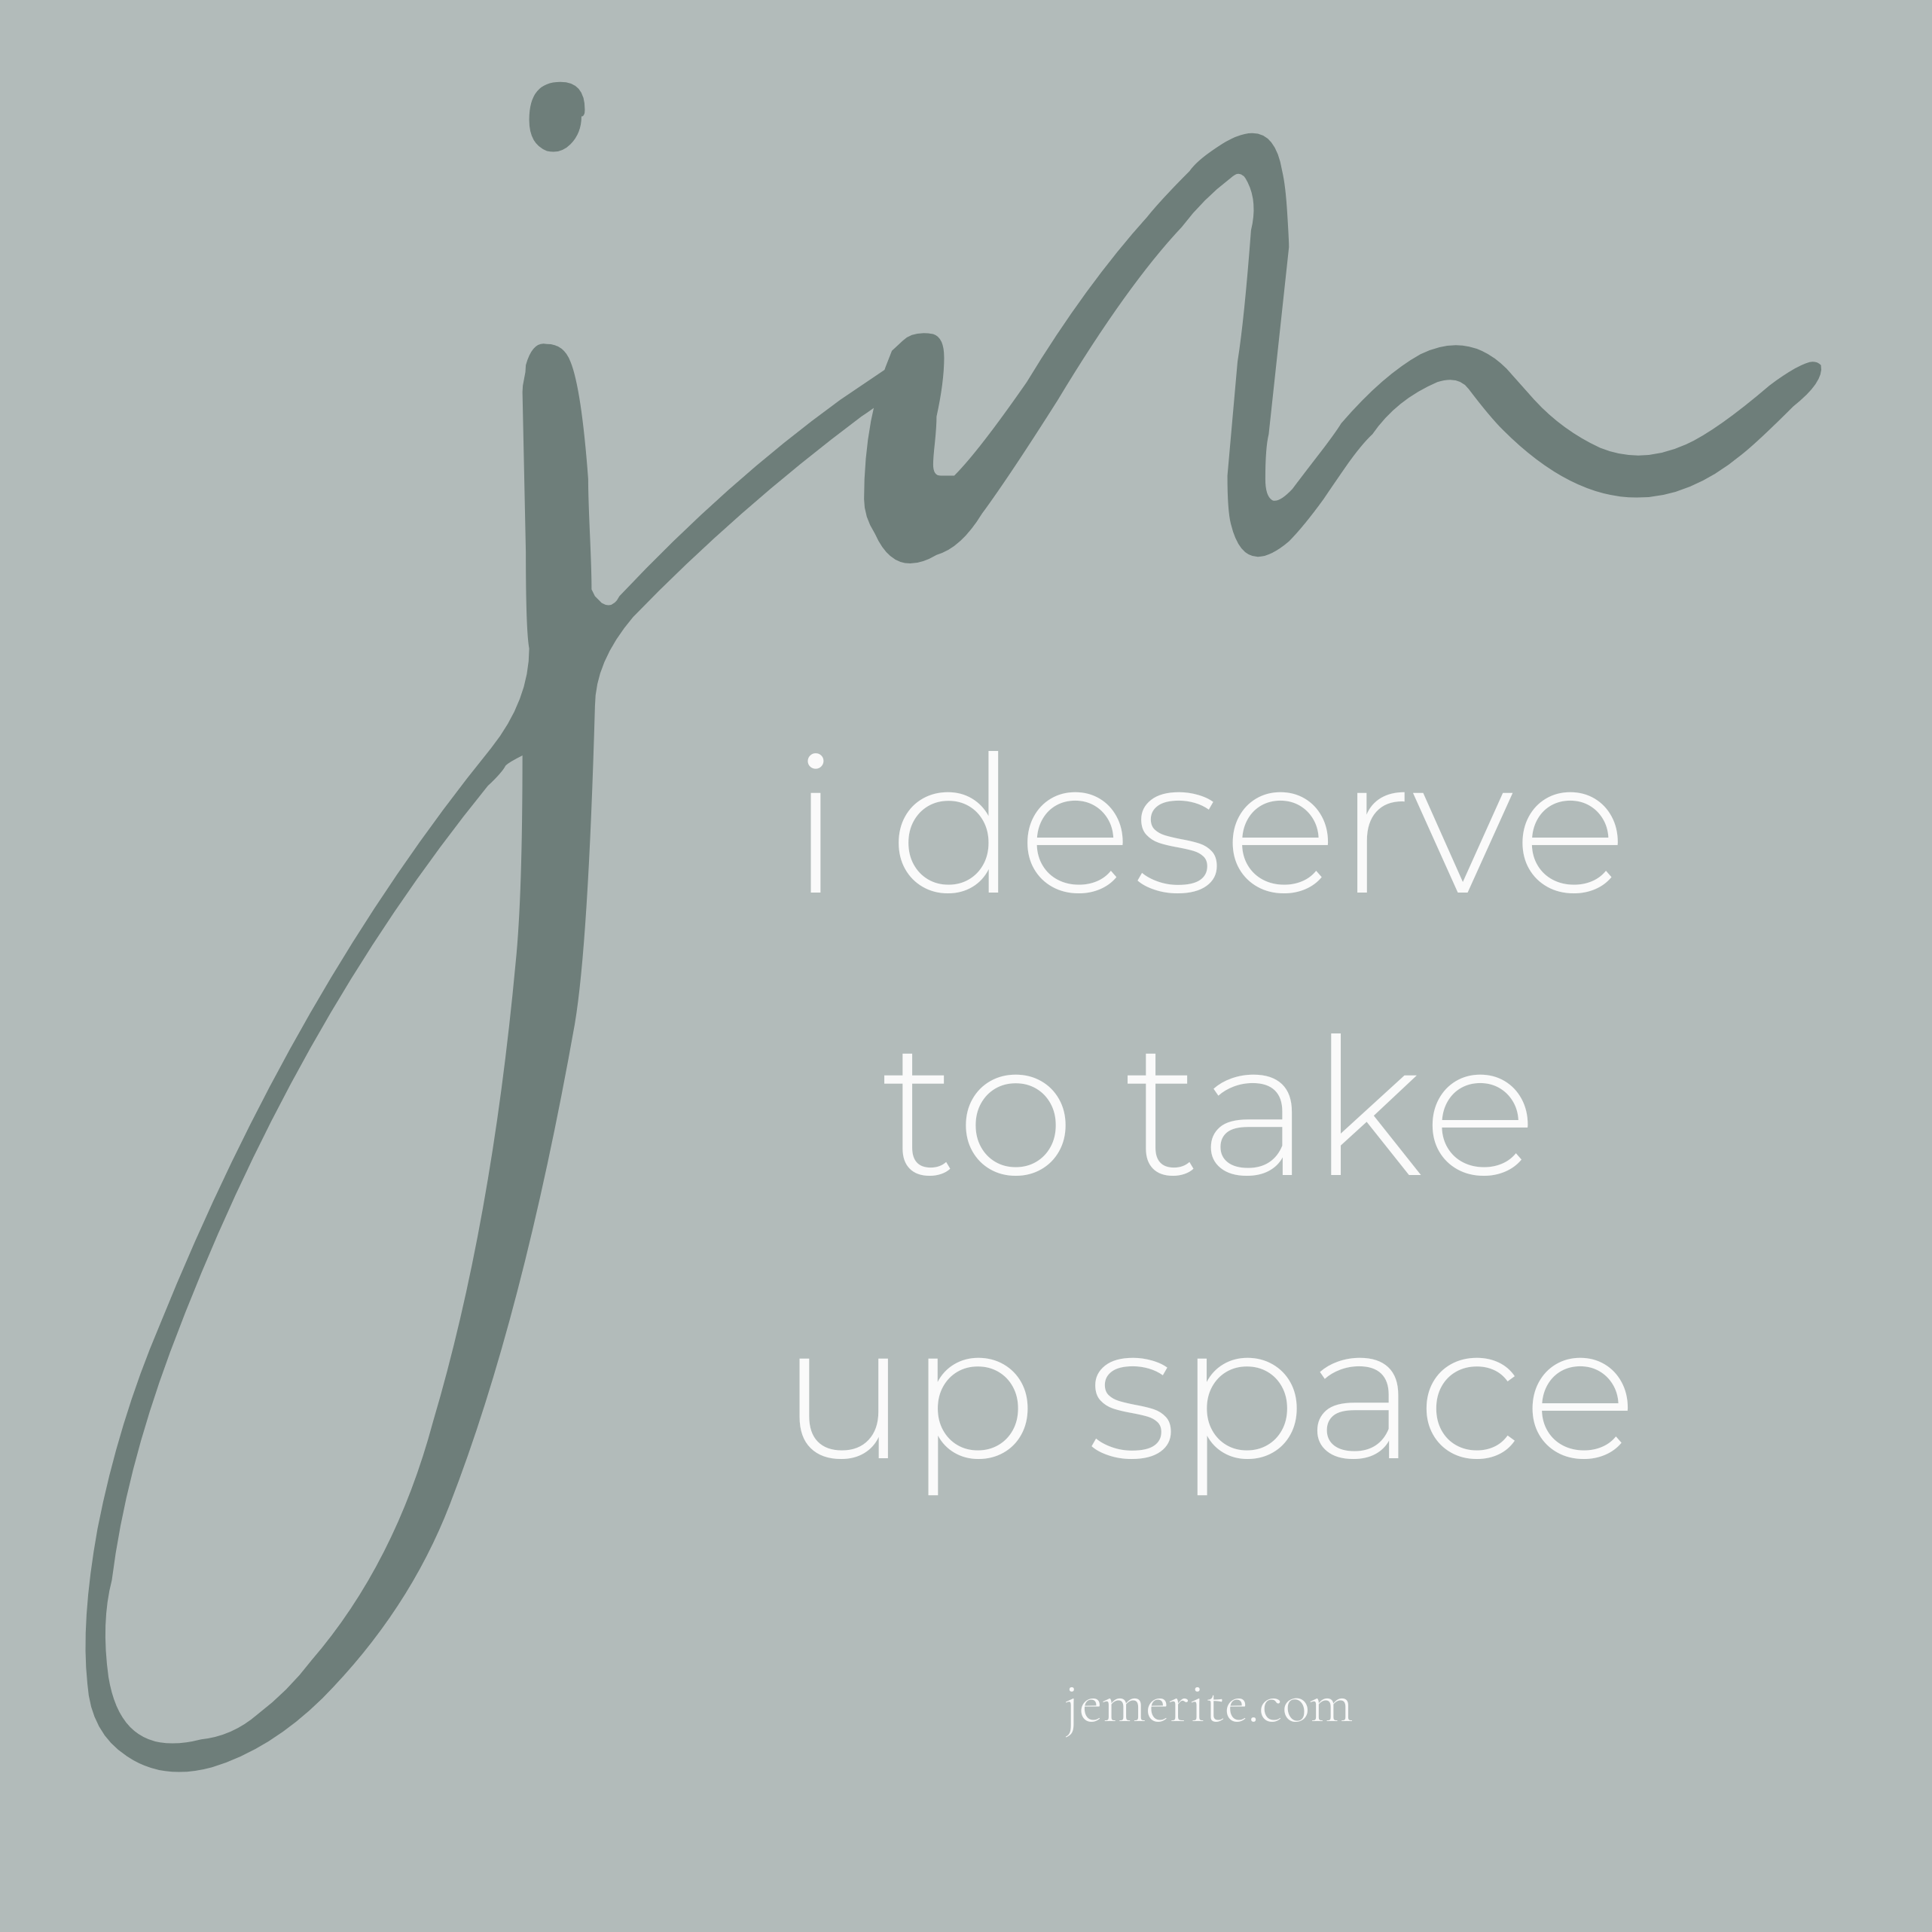 Why You Absolutely Deserve to Take Up Space